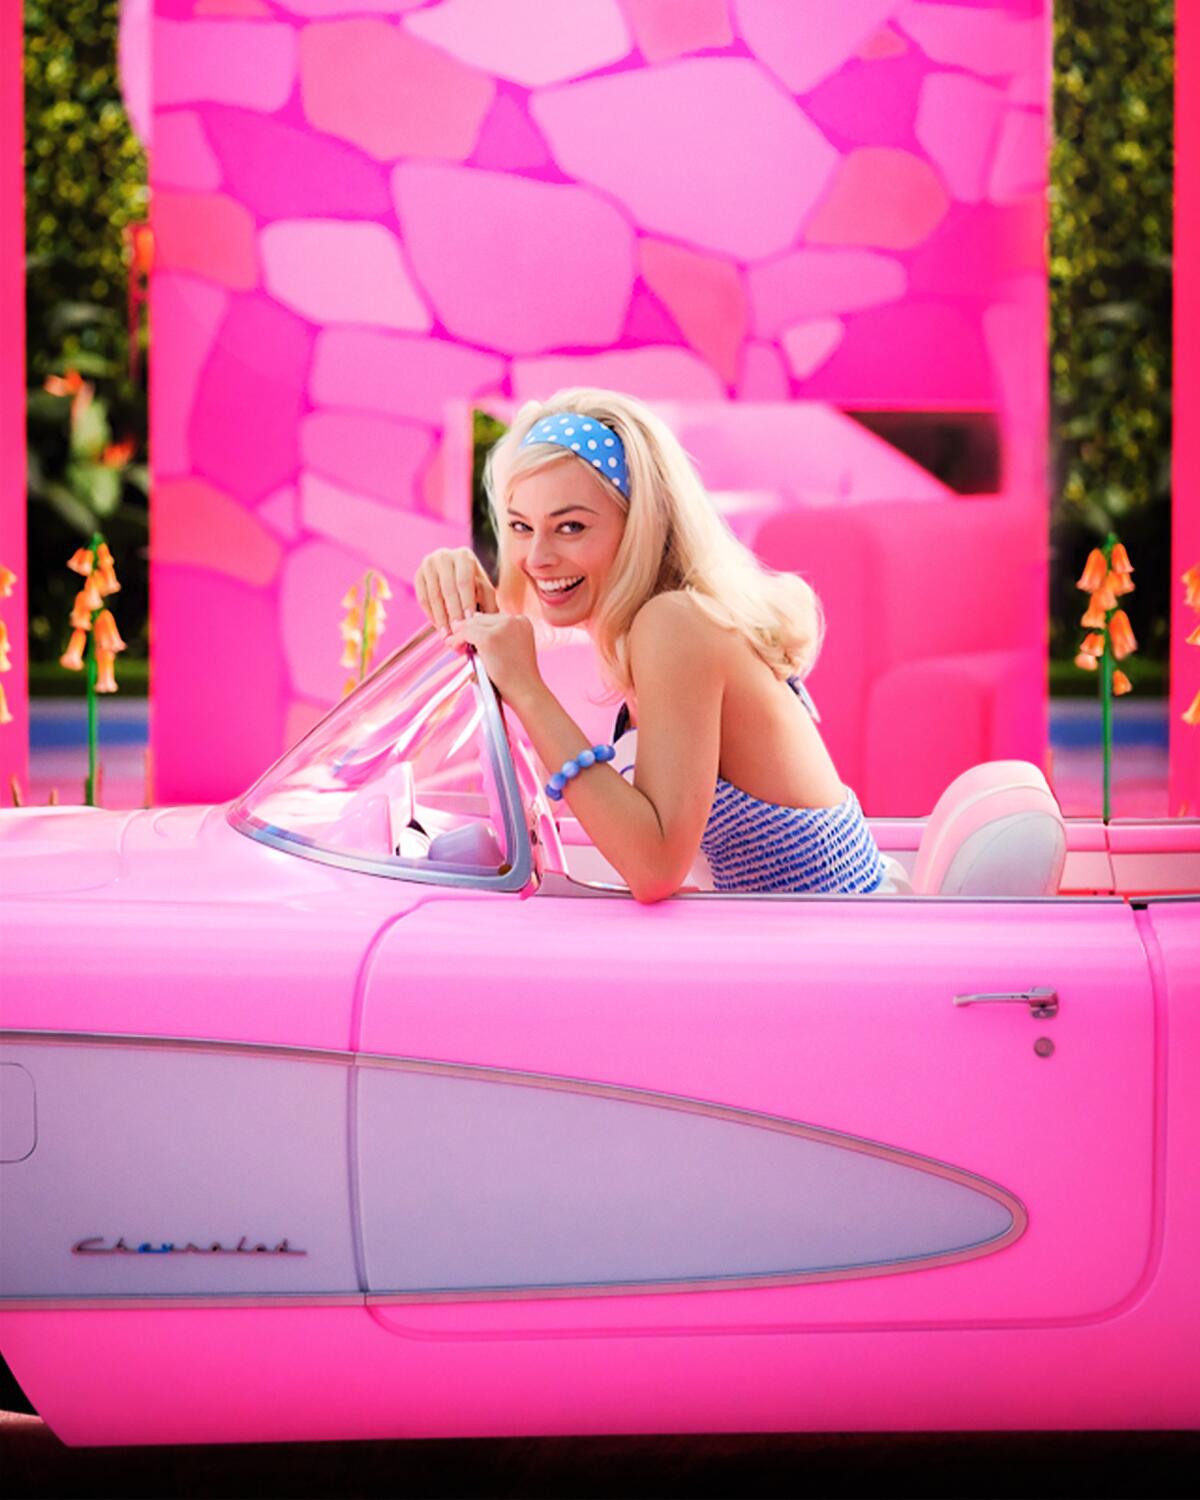 In character as Barbie, Margot Robbie peeks over the windshield of a pink convertible car.